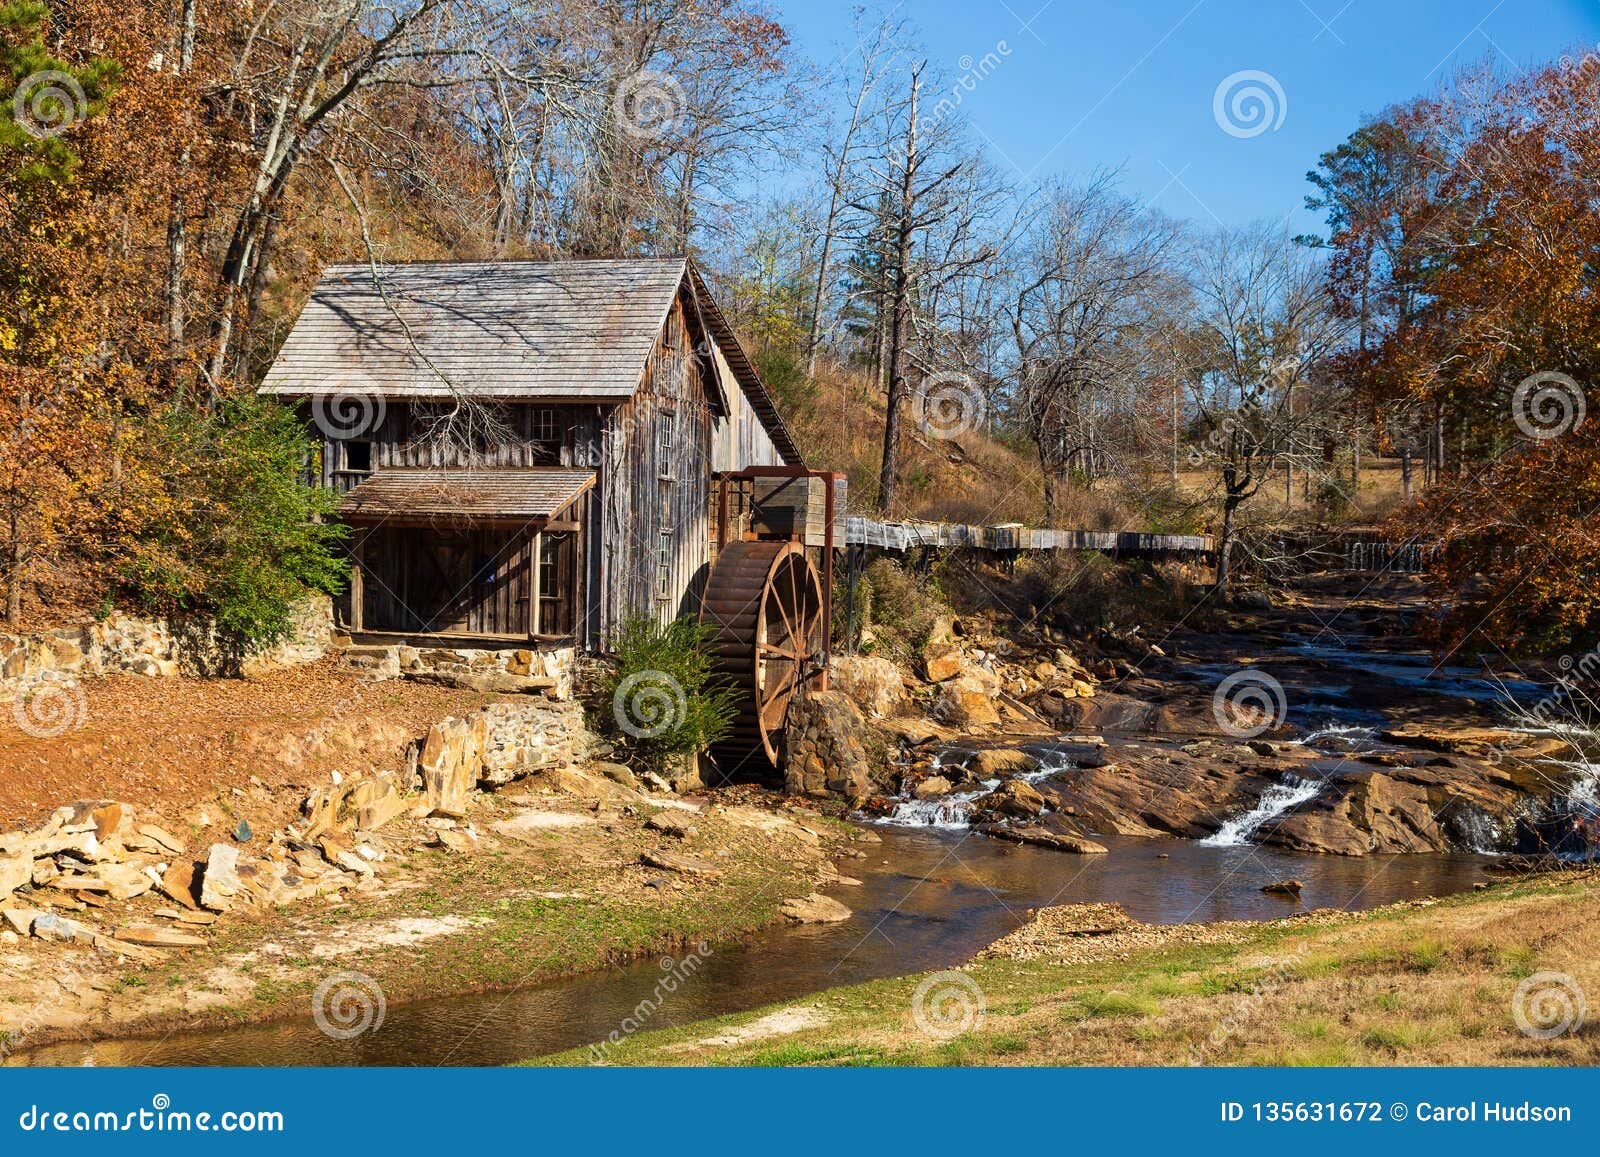 historic sixes mill from the 1800s in canton, georgia, during autumn